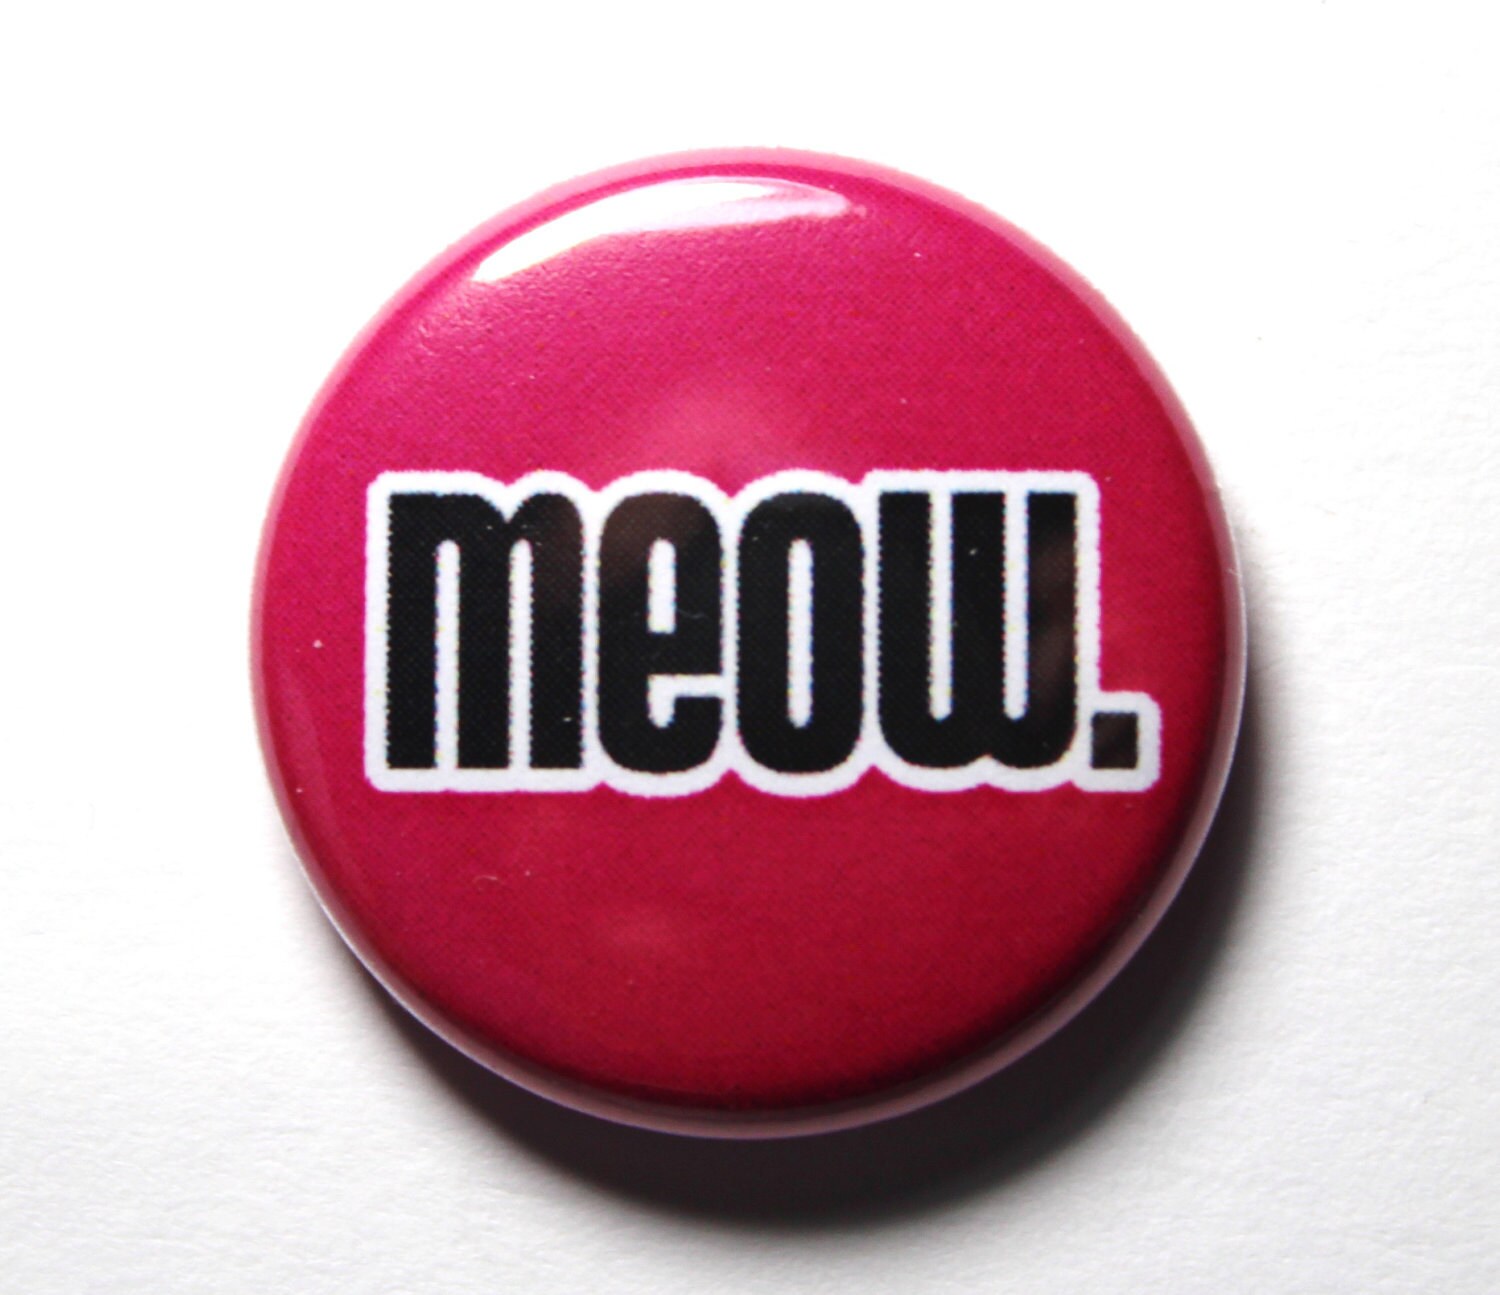 Meow Cat Button Pin Or Magnet